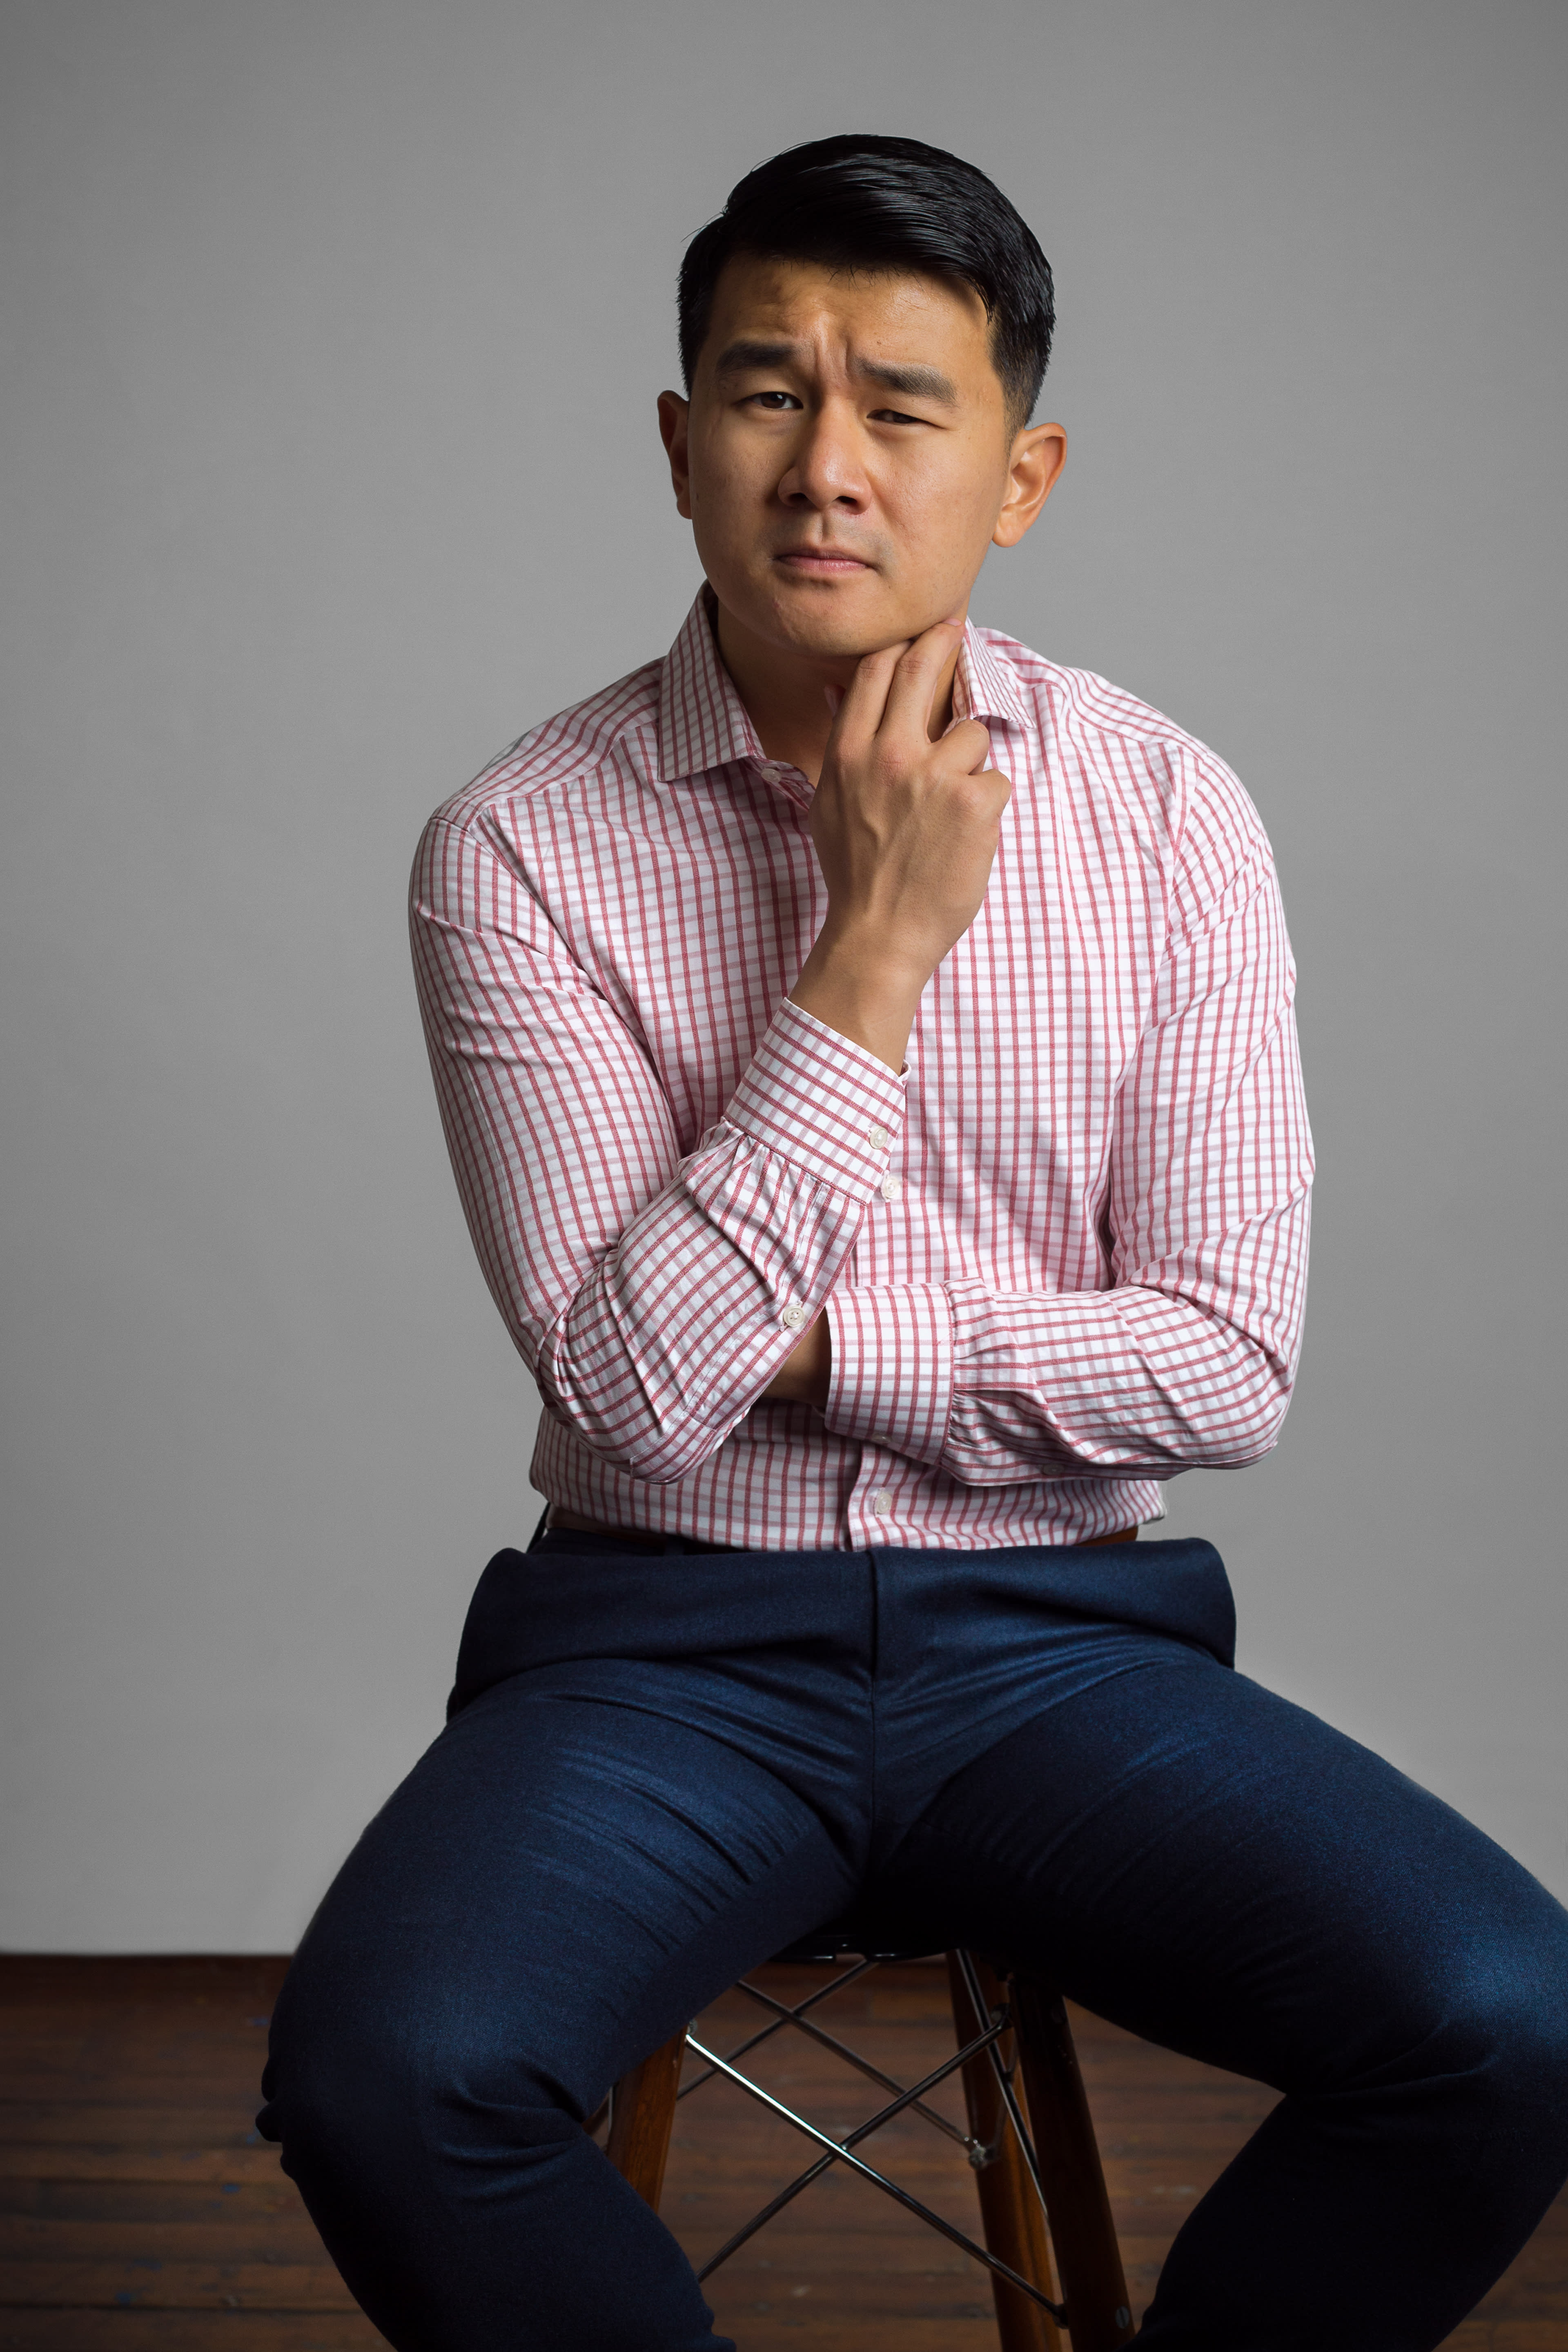 INTERVIEW: Ronny Chieng on Singaporean and Malaysian comedians, 